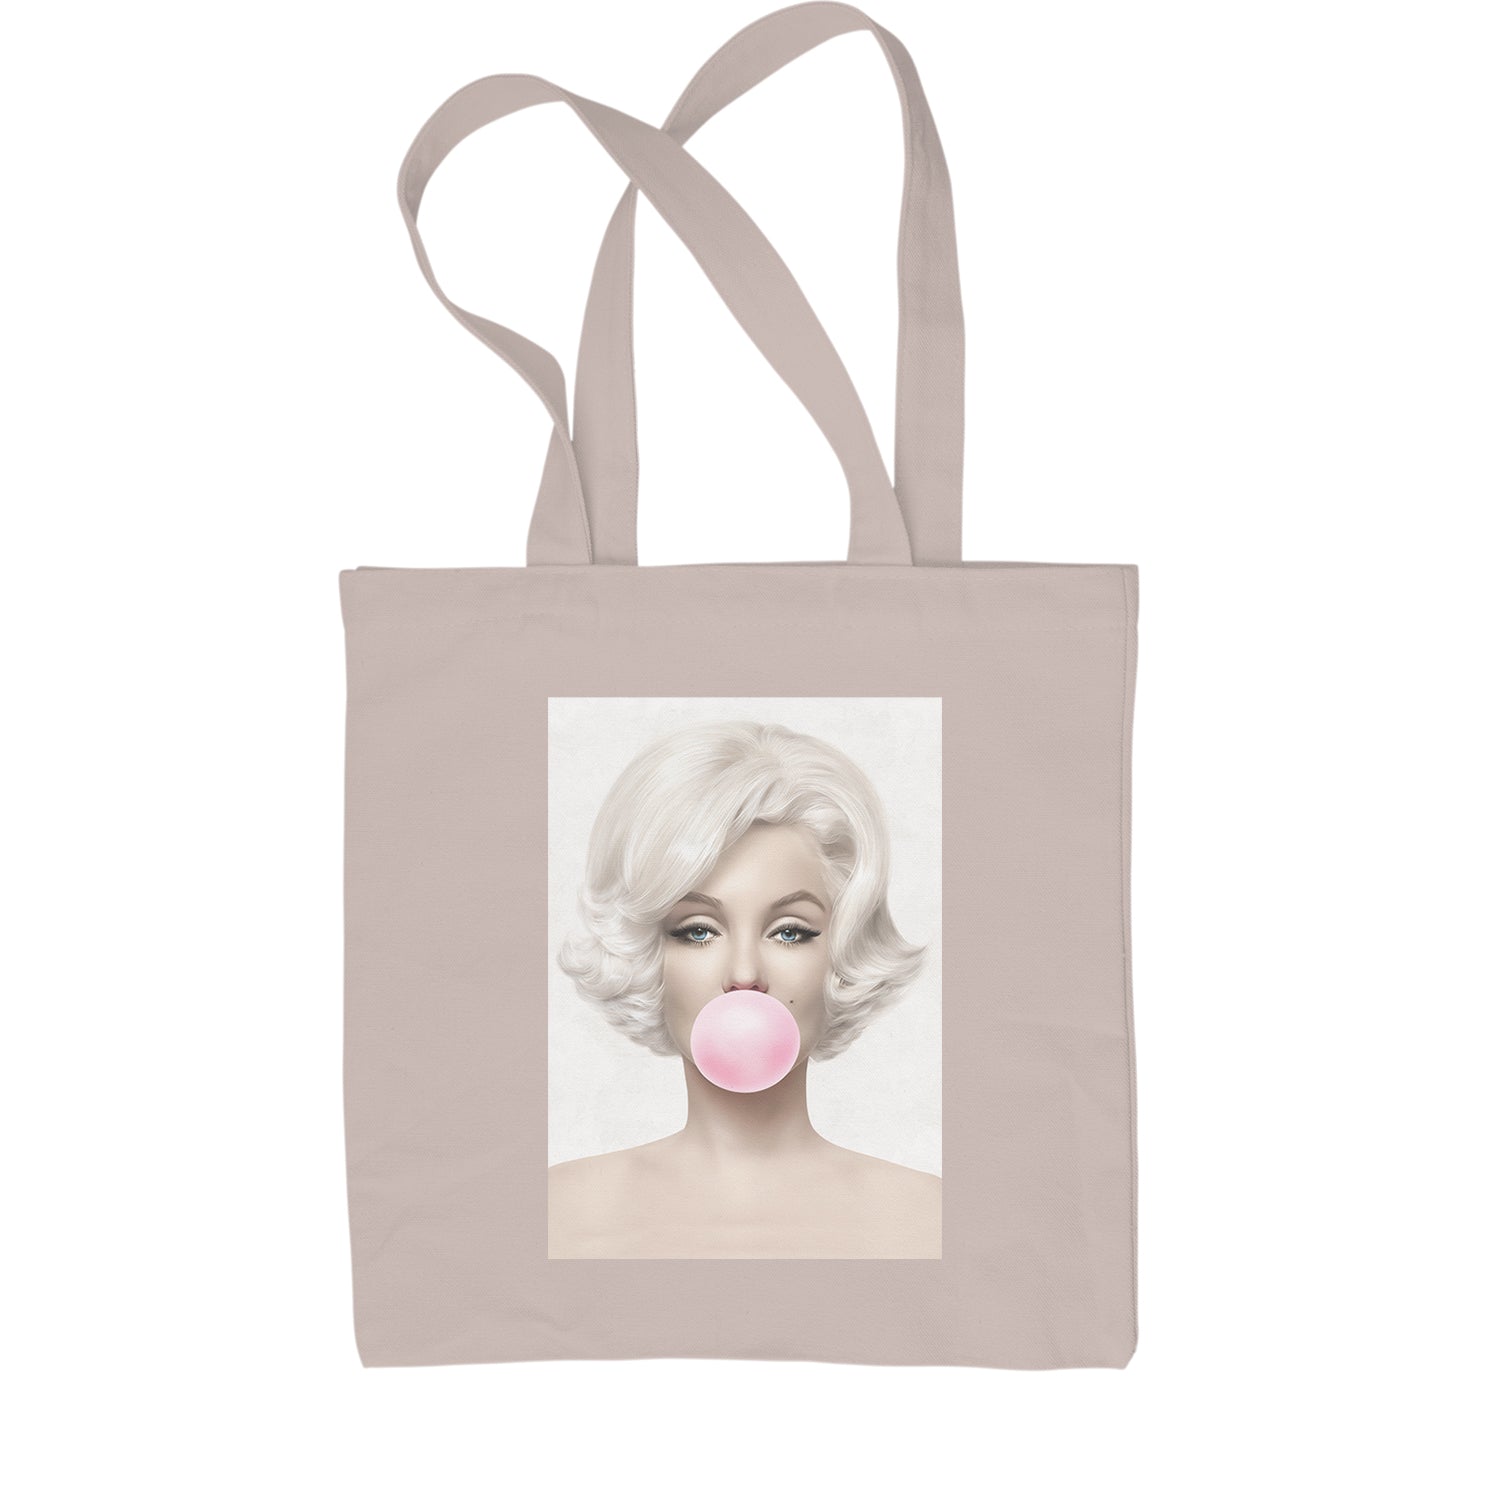 Marilyn Monroe Pink Bubble Gum Shopping Tote Bag marilyn, monroe by Expression Tees